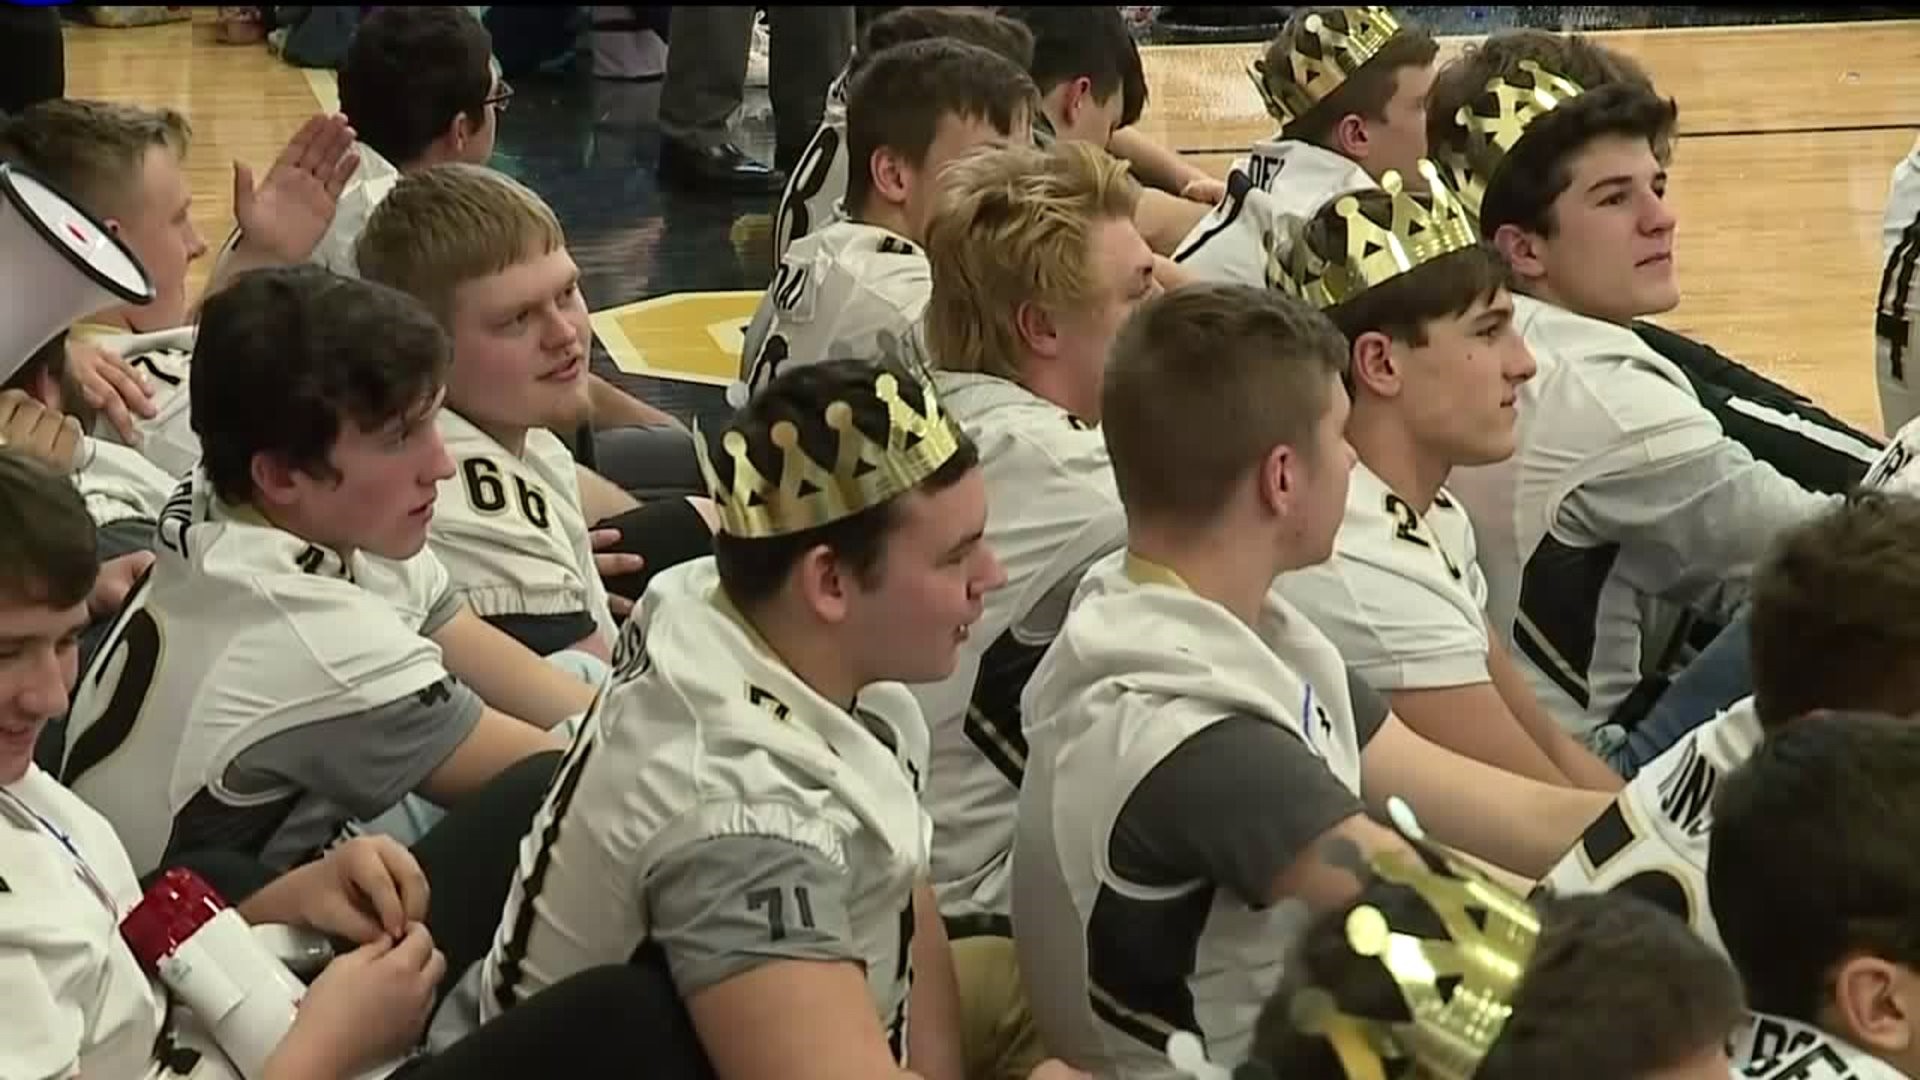 Pep Rally at Southern Columbia as Tigers Get Ready for Big Game